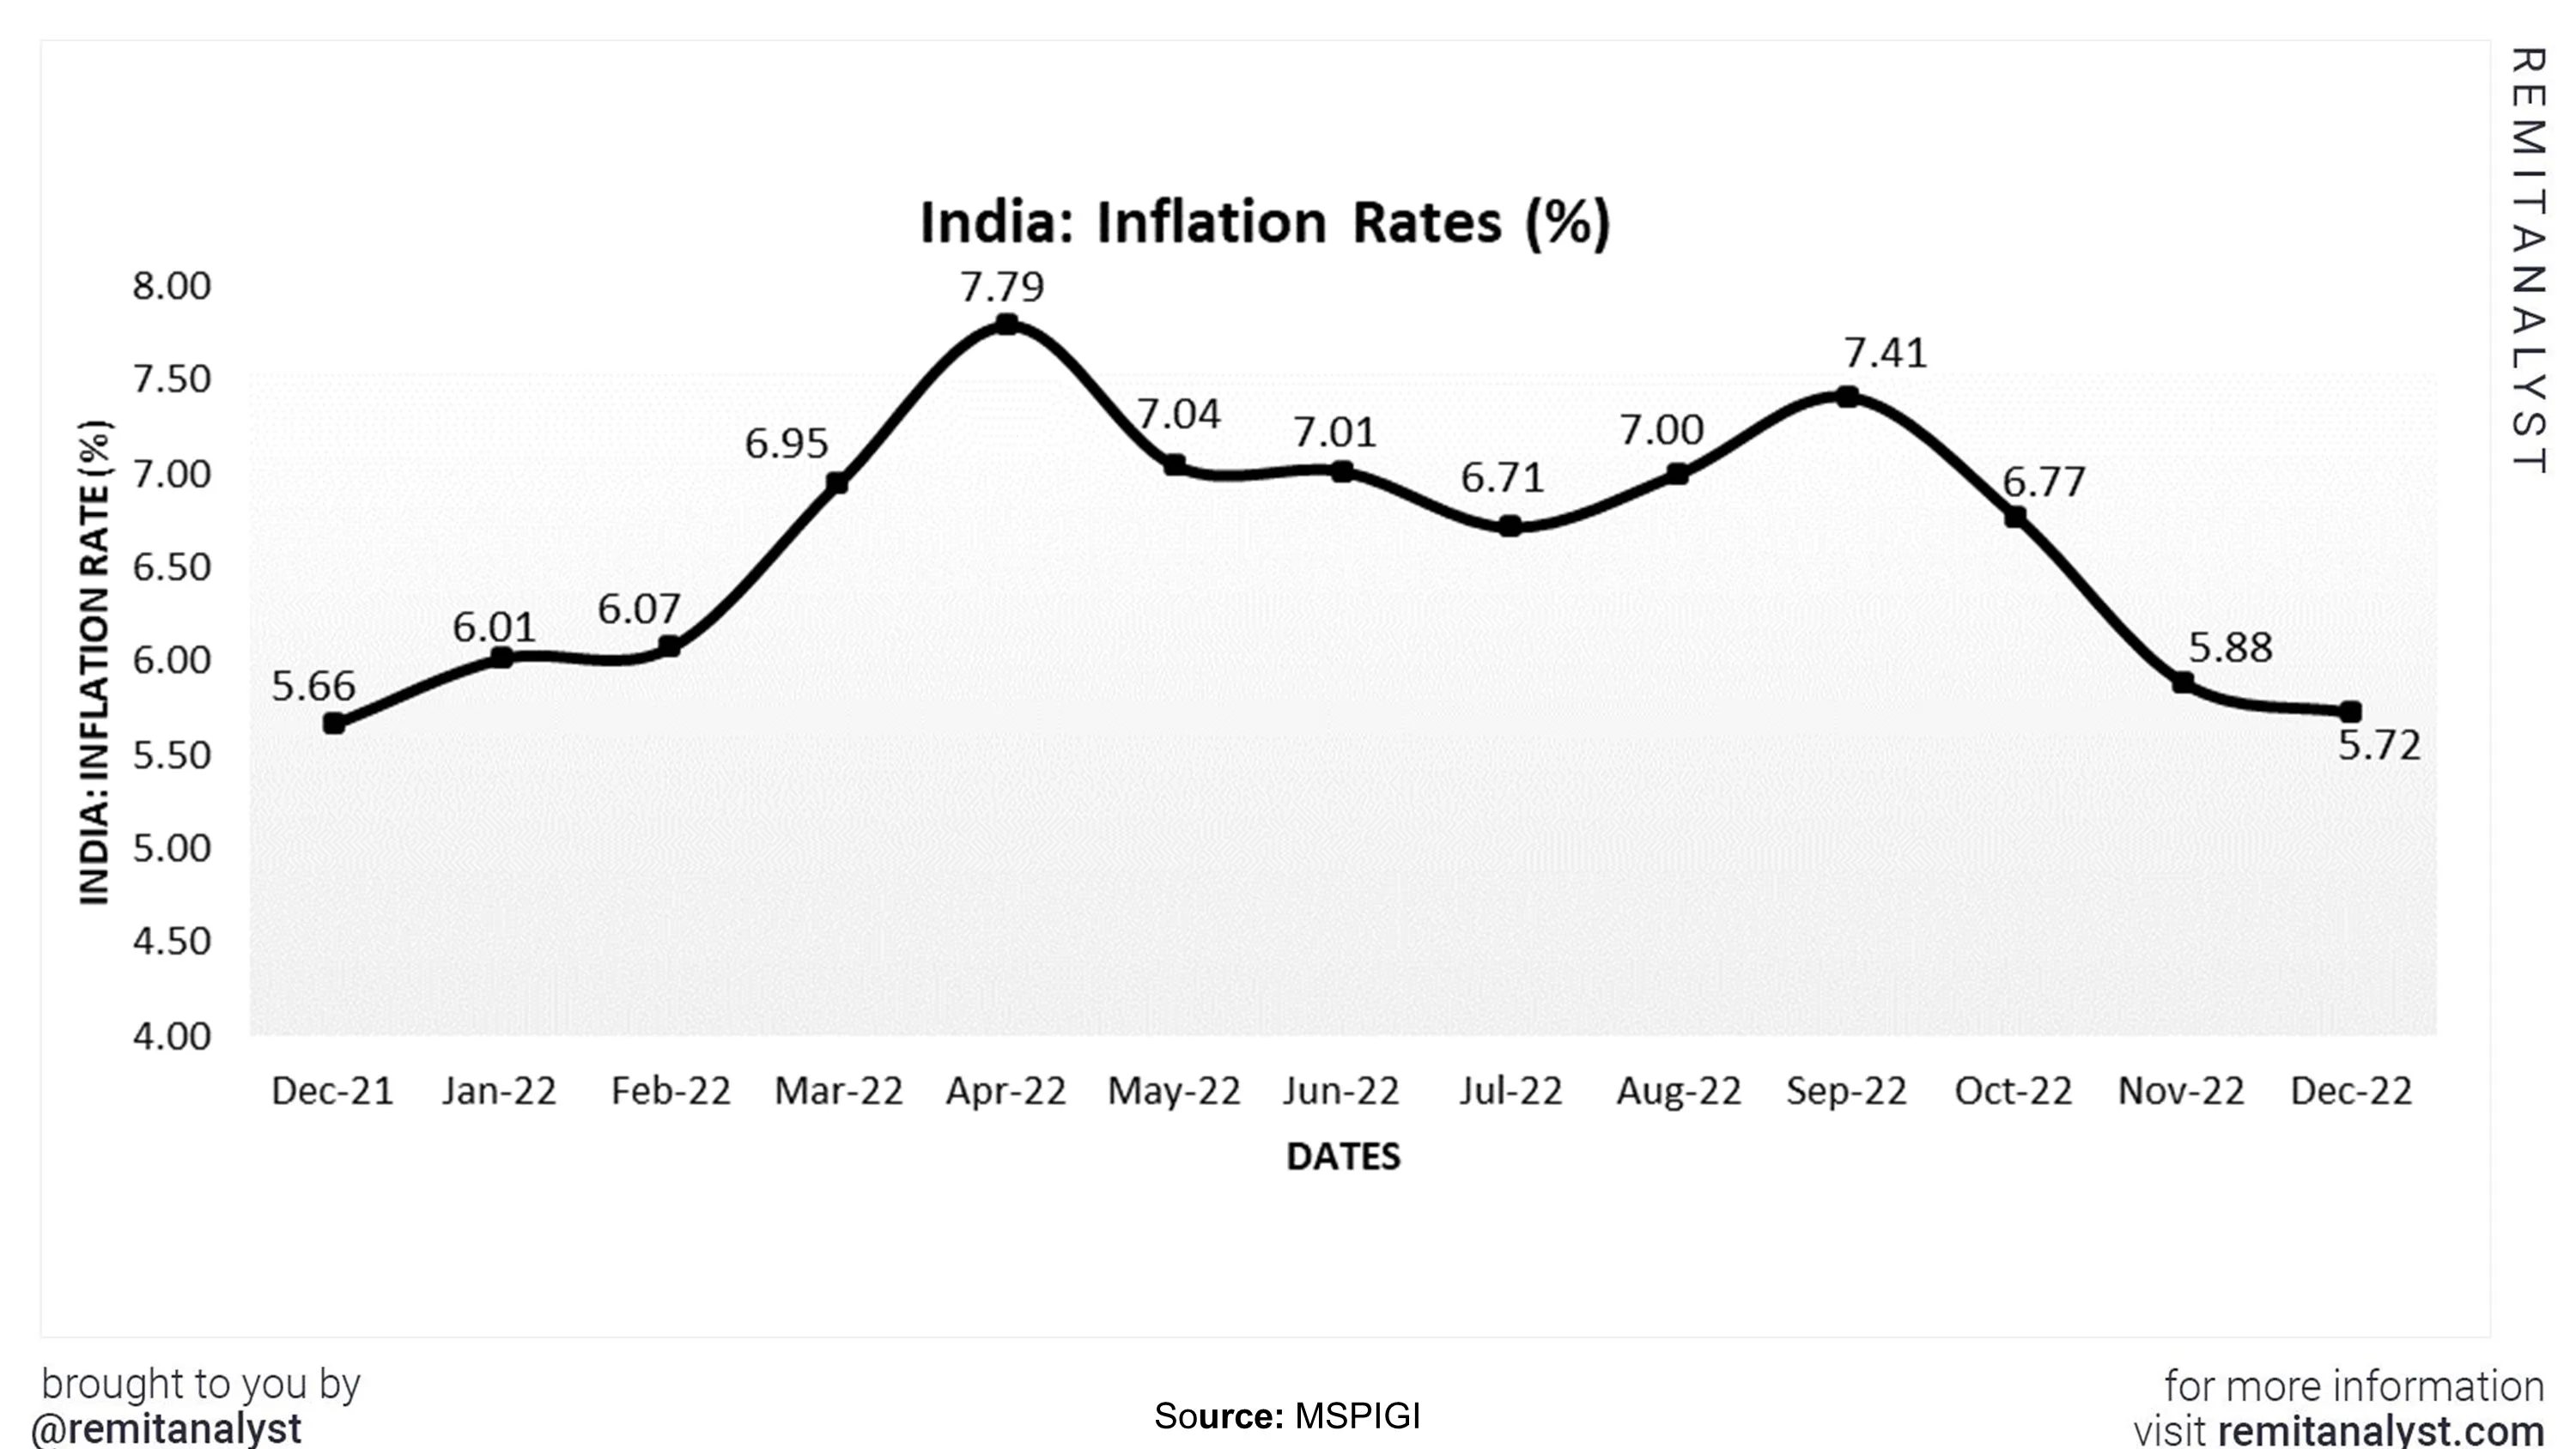 inflation-rates-in-india-from-dec-2021-to-dec-2022